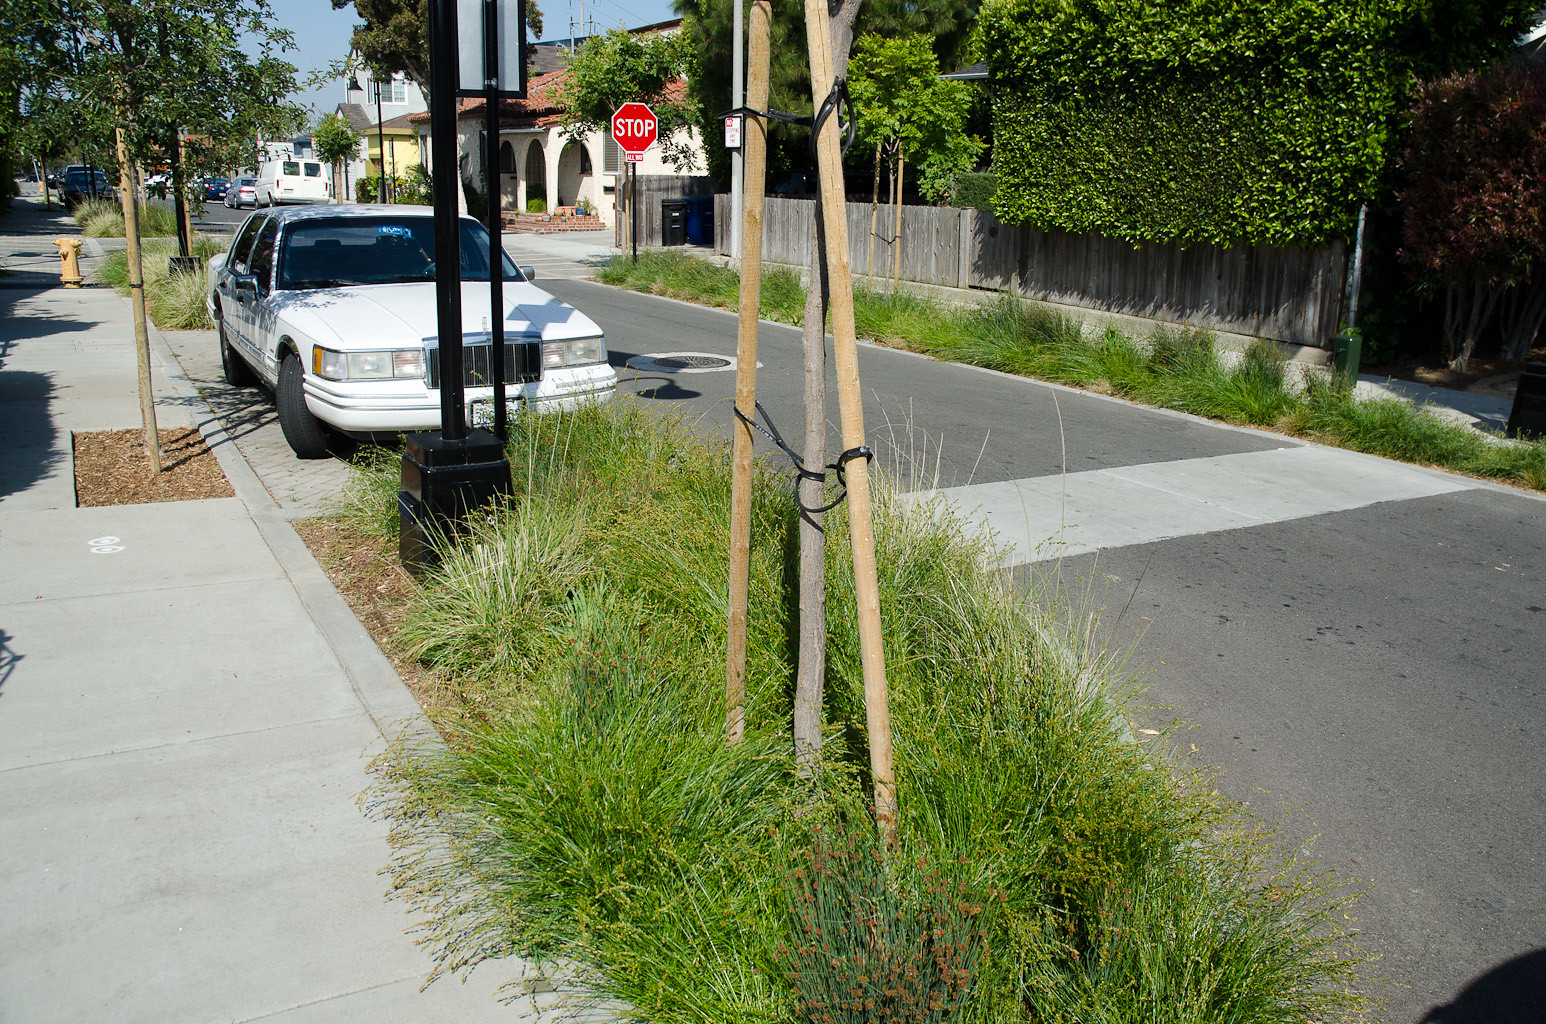 A bioswale in LA can collect polluted runoff and filter it into the sewer system